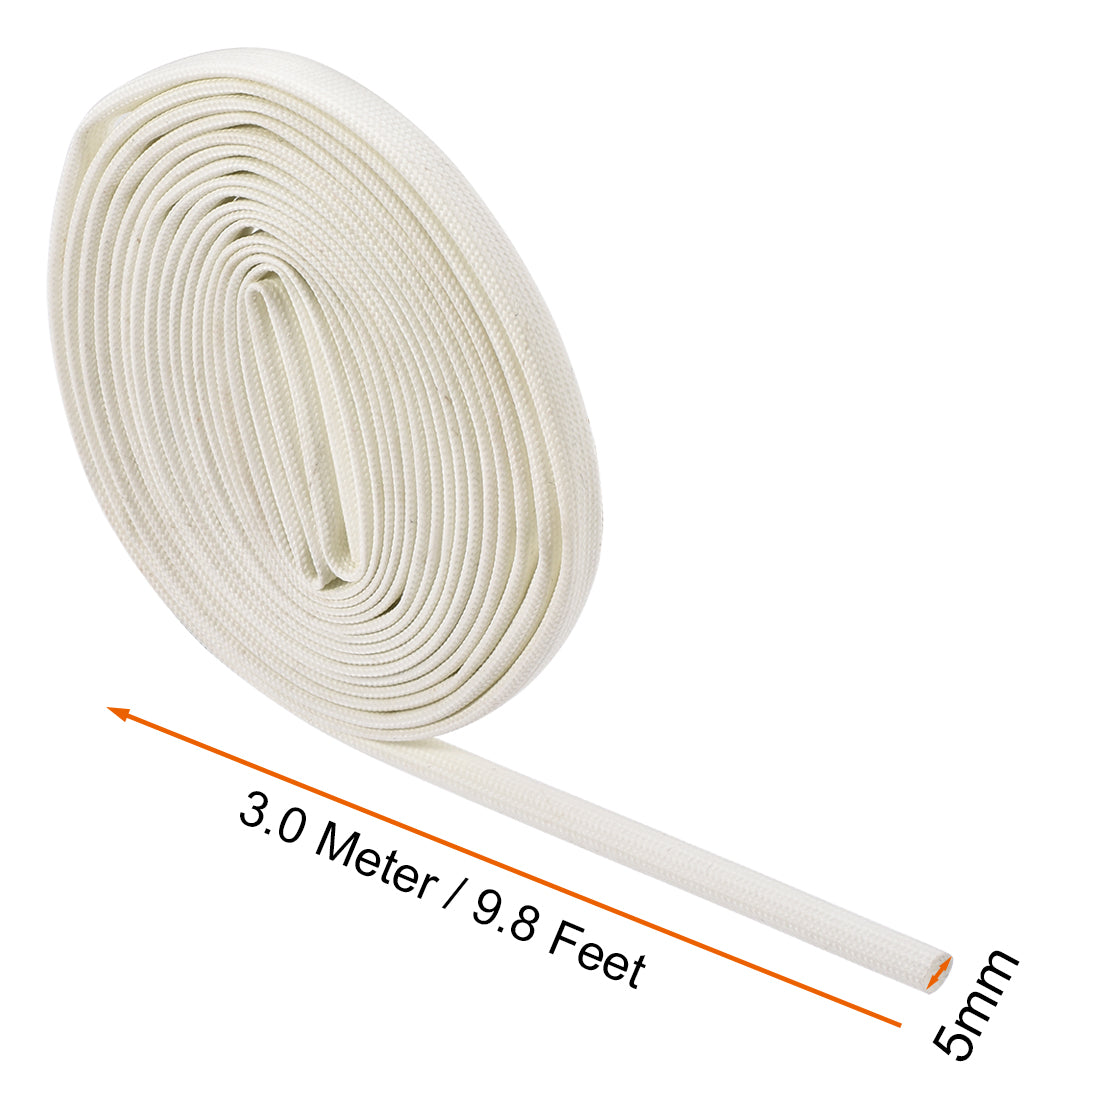 uxcell Uxcell Insulation Cable Protector, 9.8Ft-5mm High TEMP Silicone Fiberglass Sleeve White